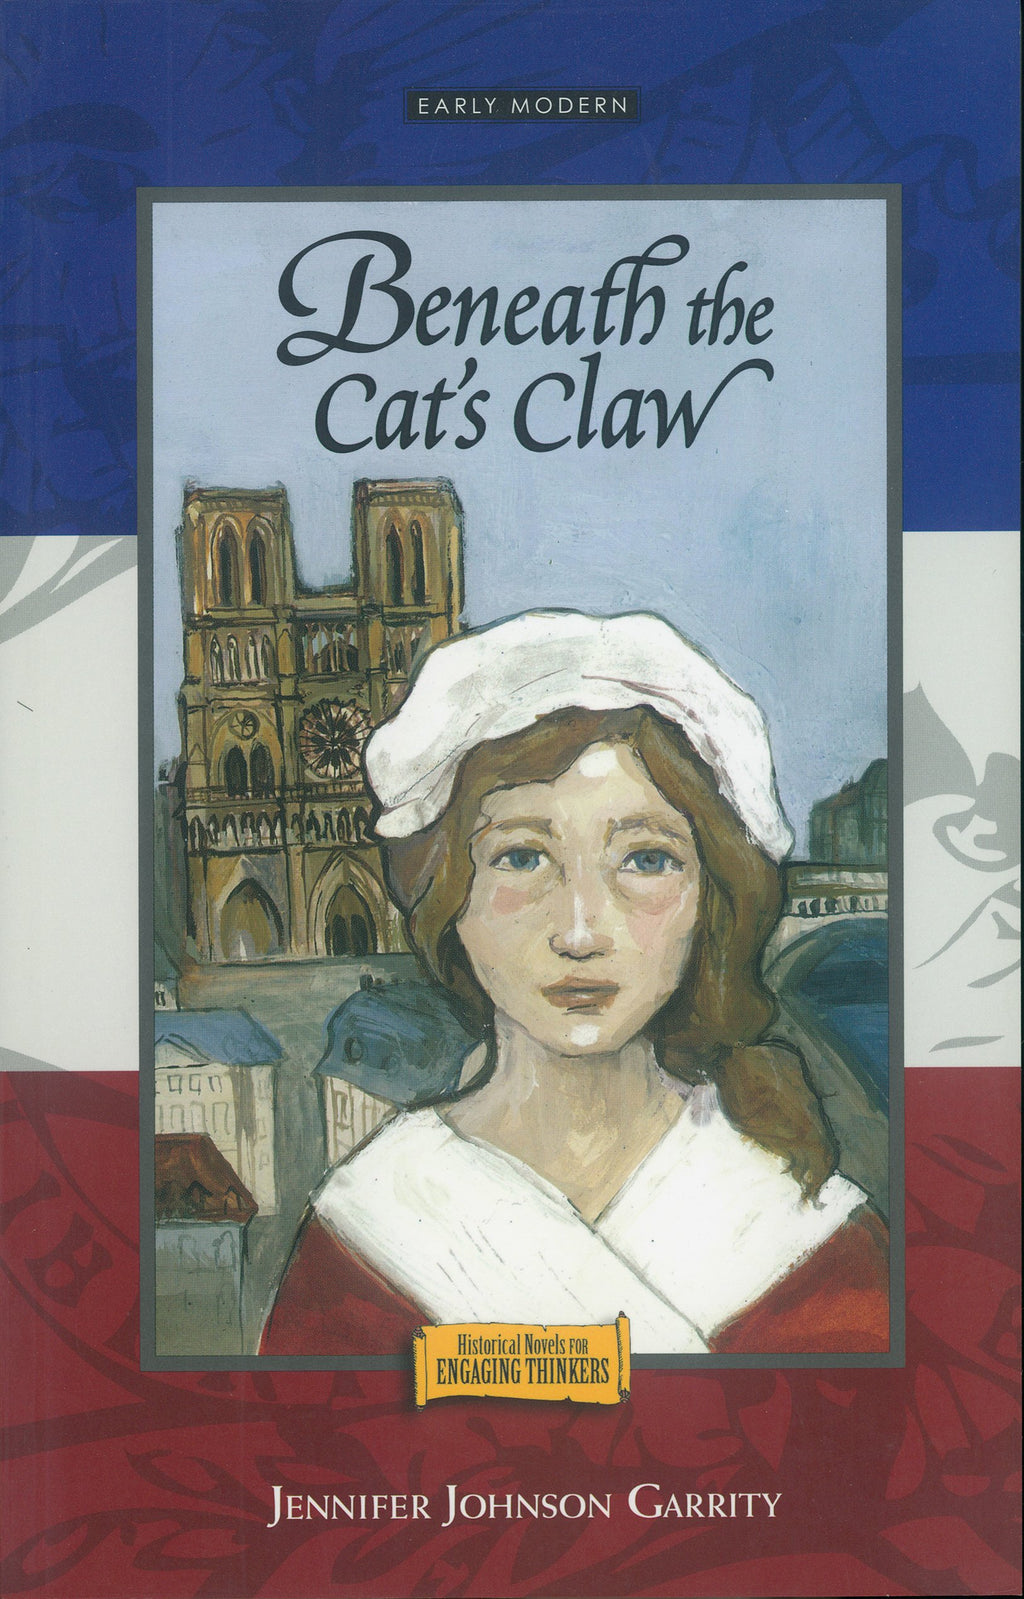 Historical Novel for Engaging Thinkers 3 - Beneath the Cat's Claw